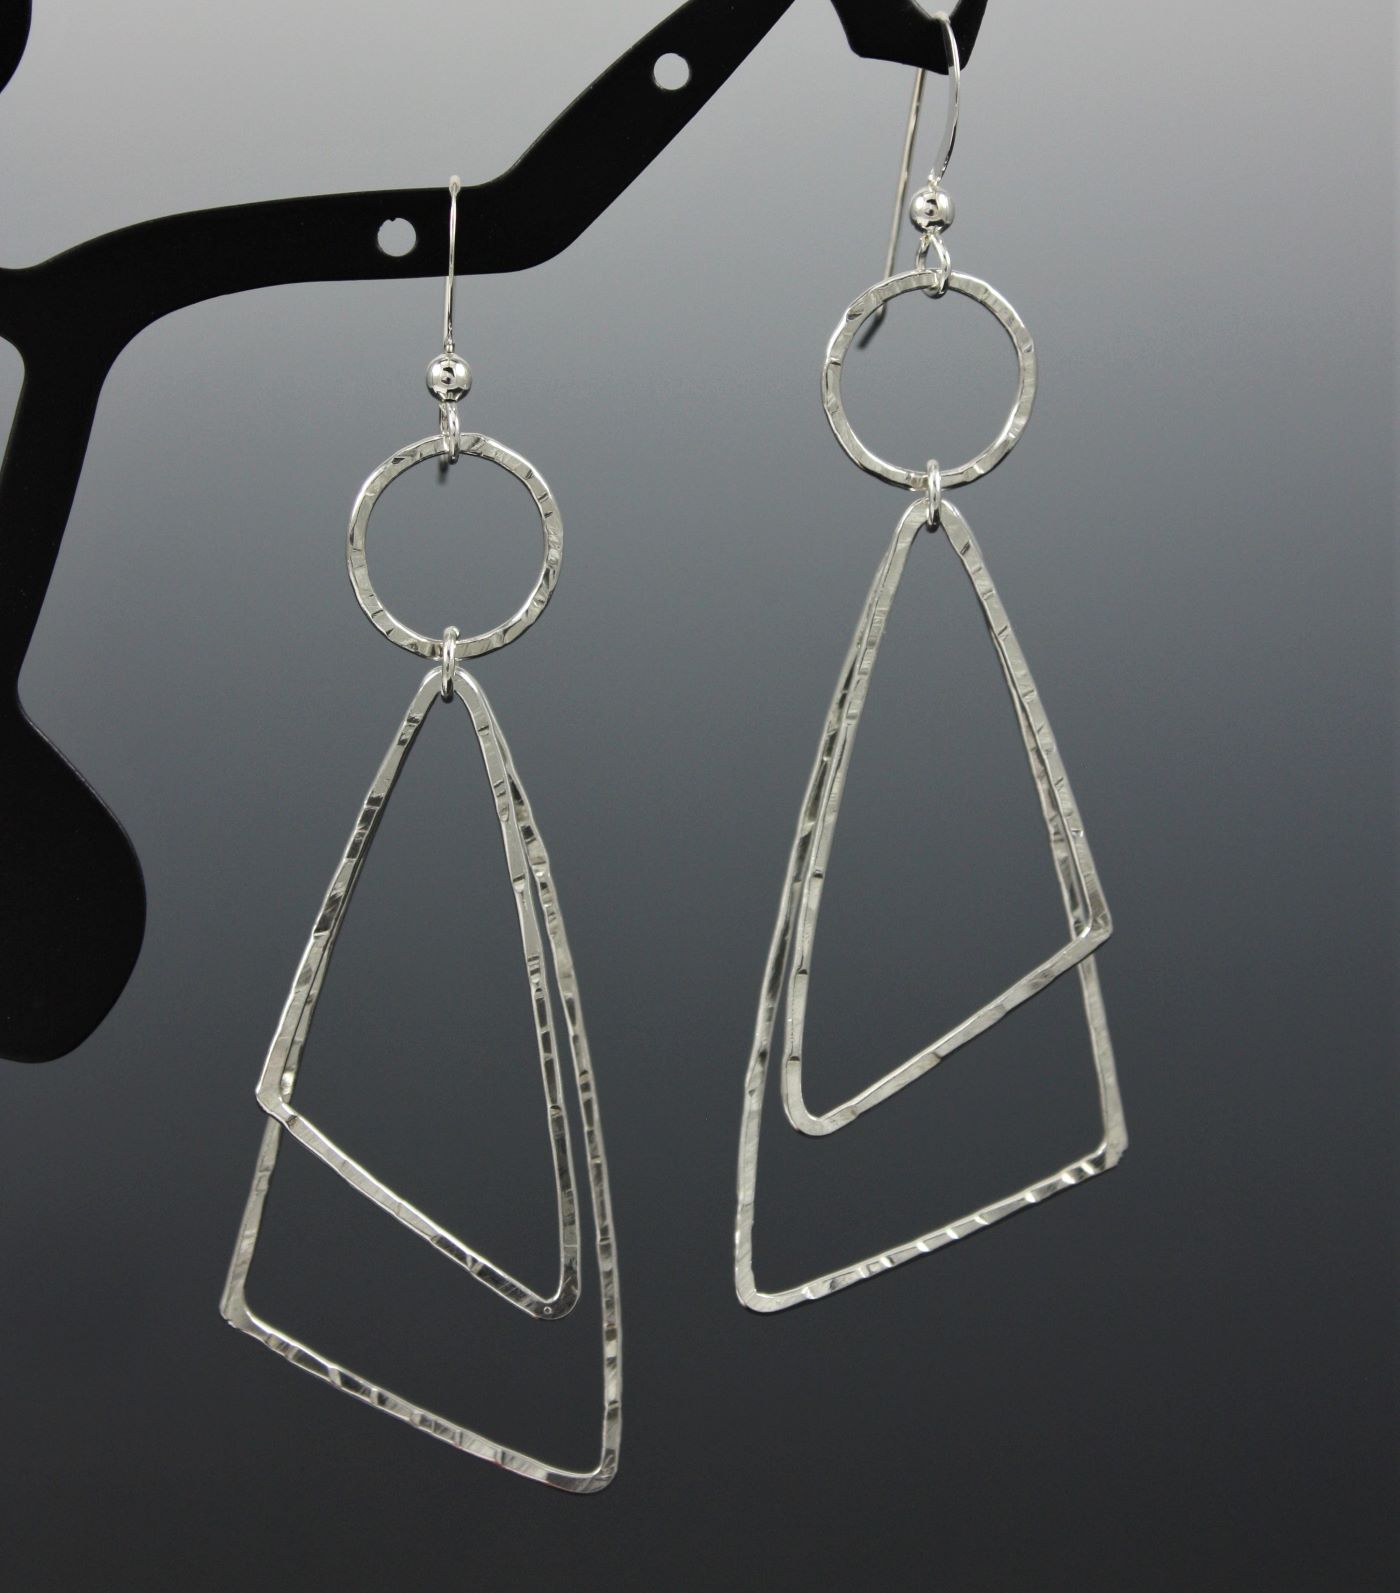 Handmade Made to Order Handforged Sway Sterling Silver Earwires